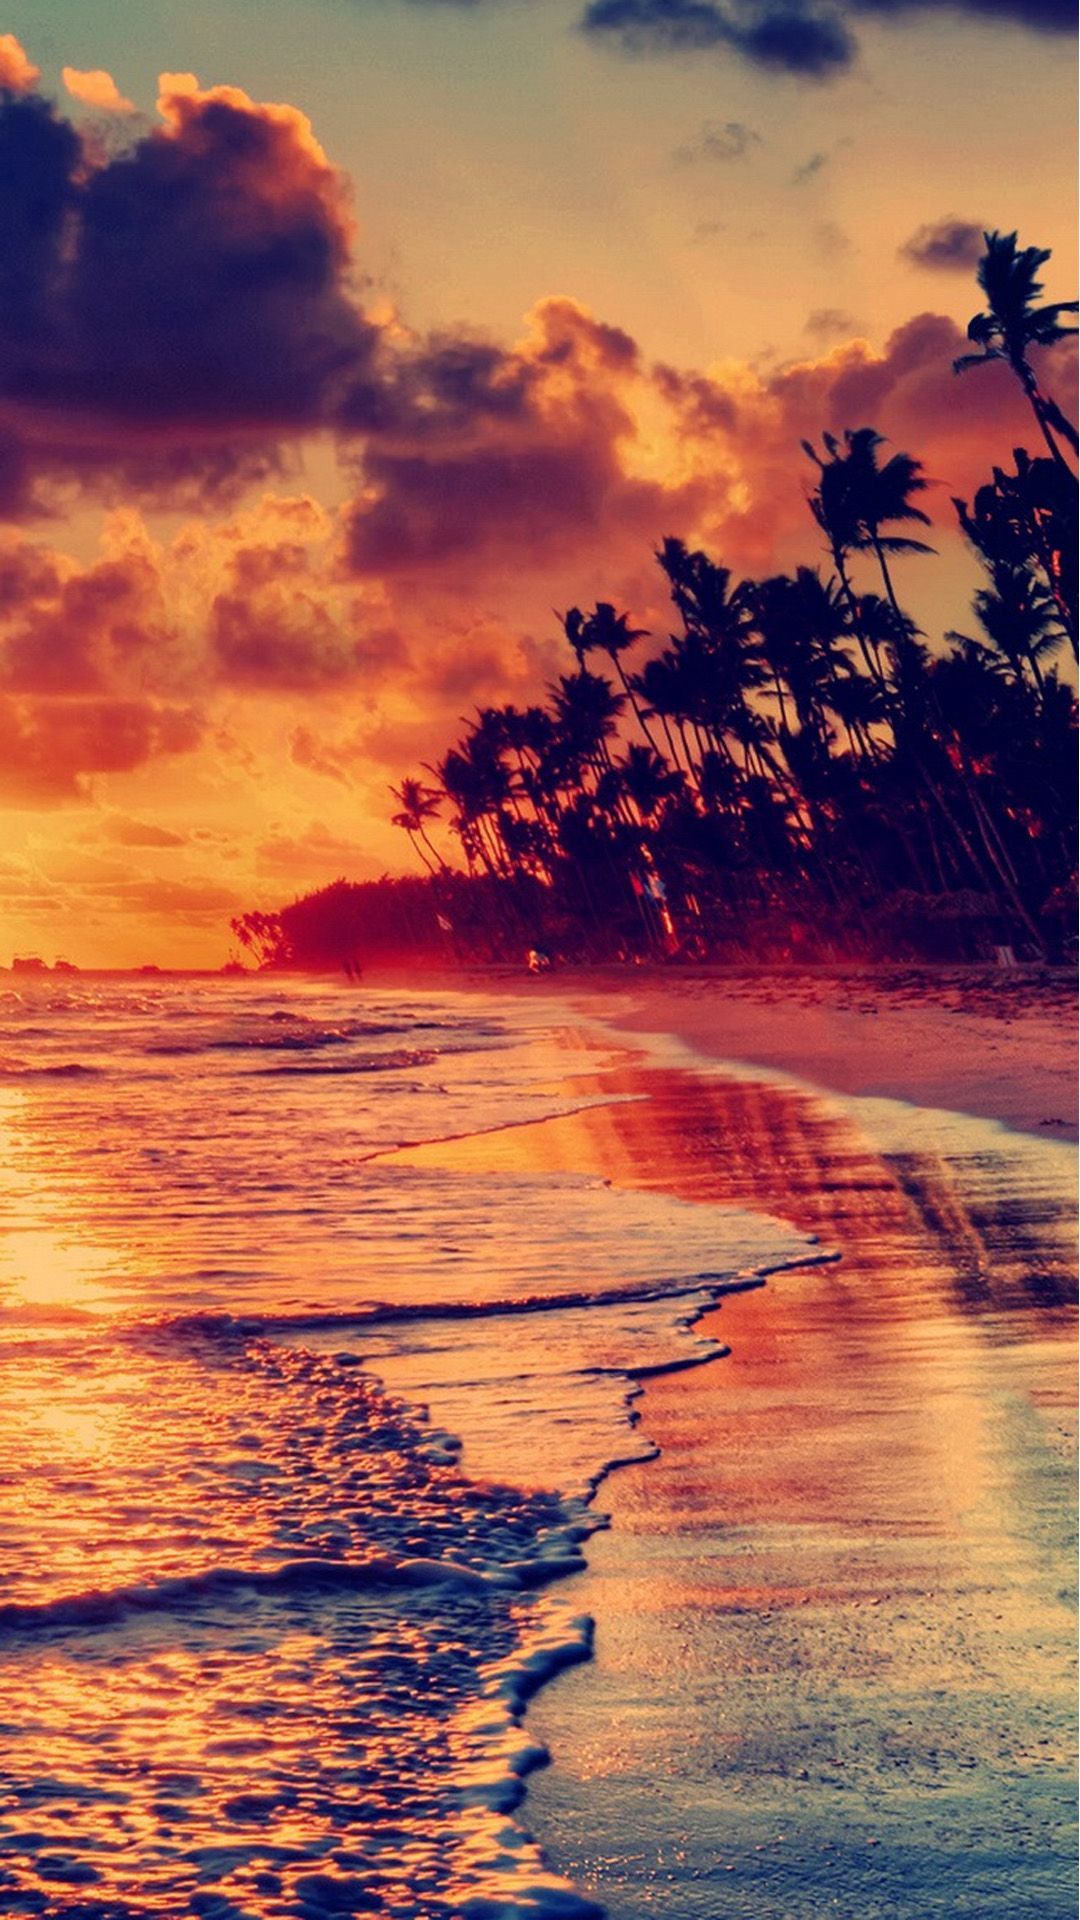 Background Images For Iphone 5